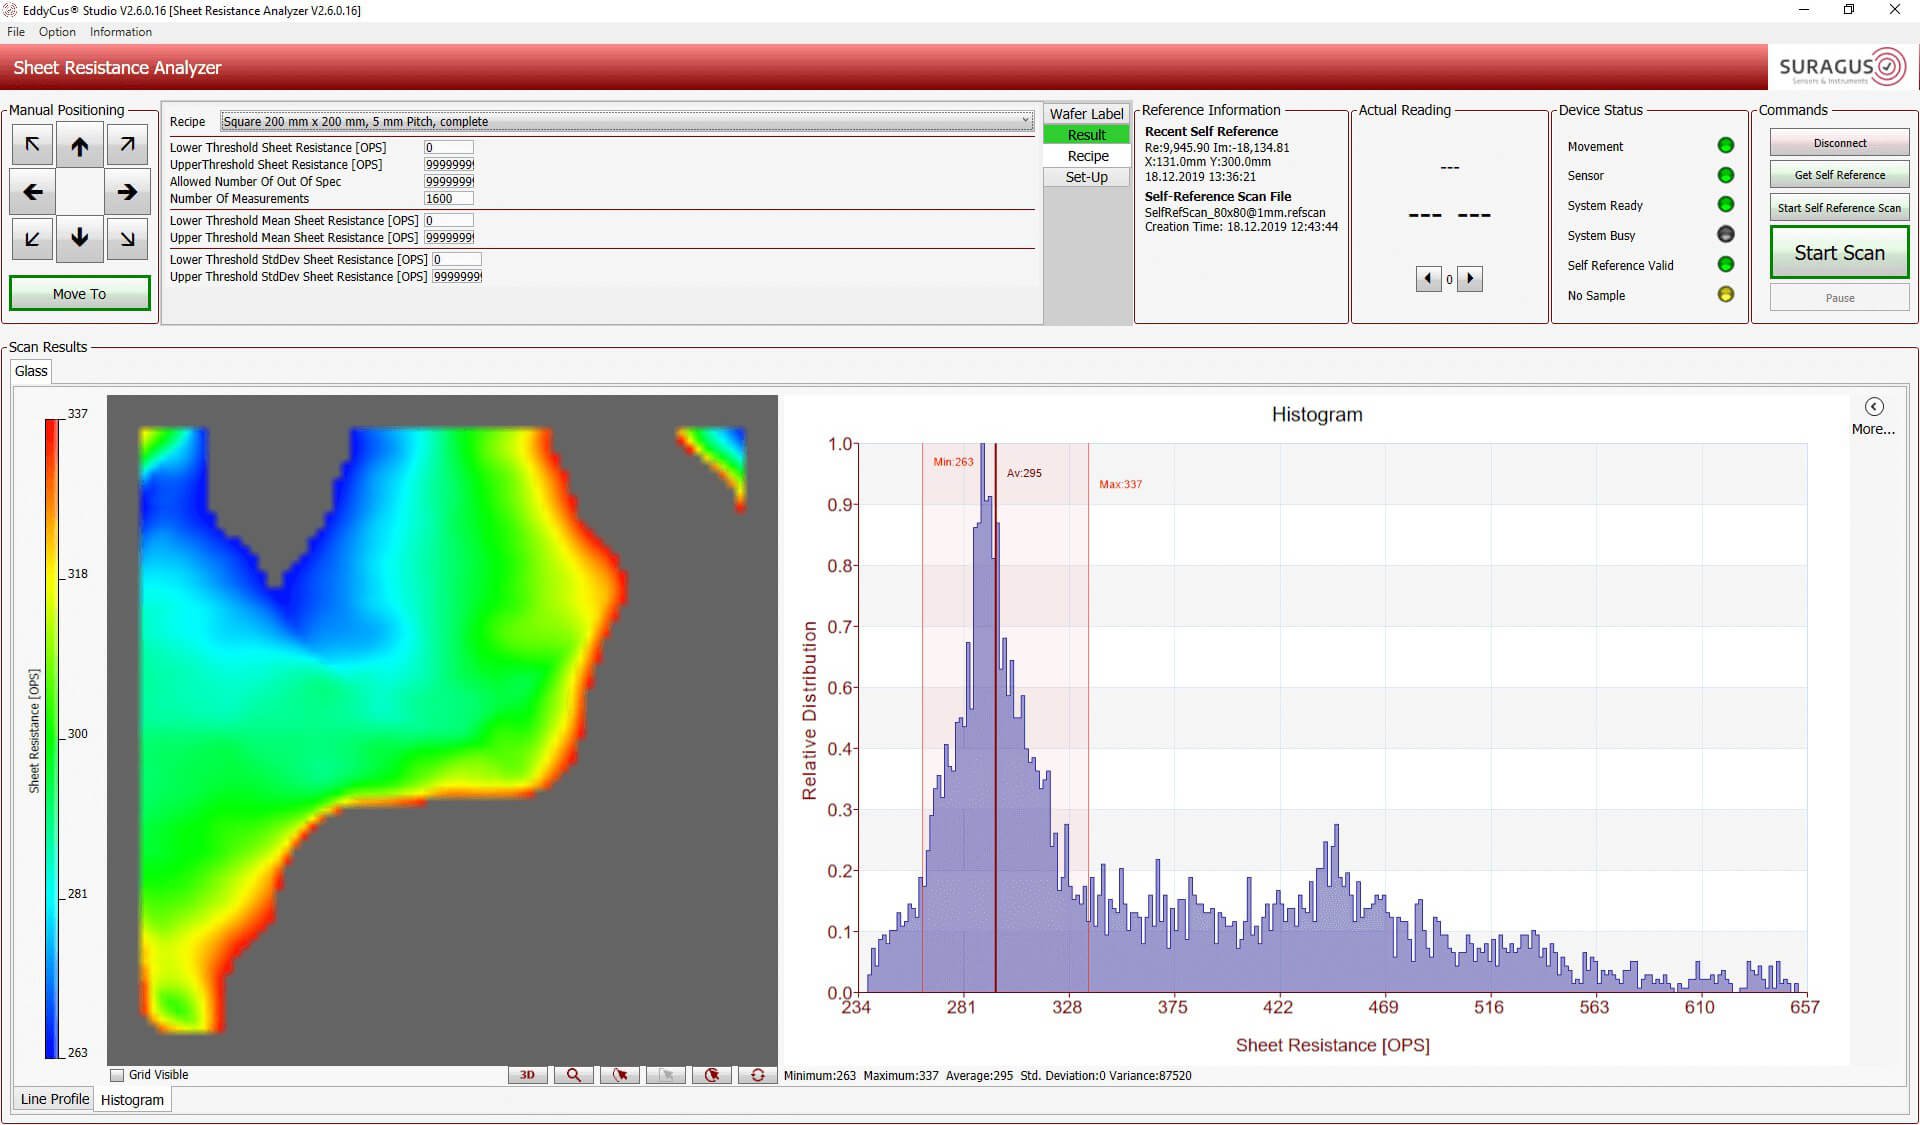 EddyCus® Studio software shows a map of a selected histogram area